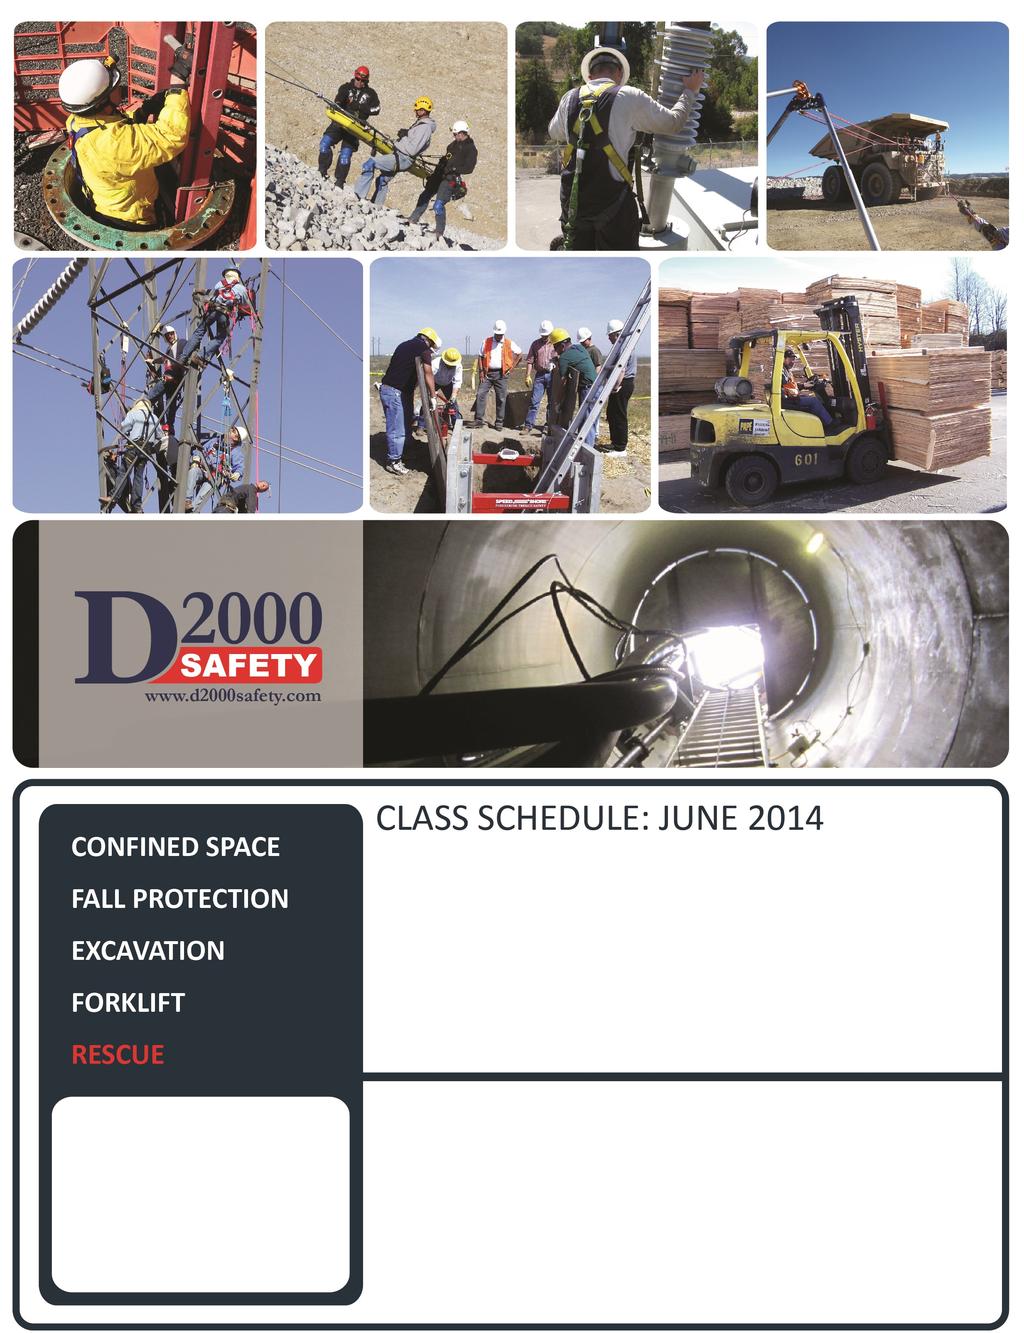 TM SAFETY TRAINING and SERVICES CONFINED SPACE FALL PROTECTION D2000 Safety: Key Facts EXCAVATION Founded in 1993 and located in Eugene, Oregon, we provide training for workers in high-hazard